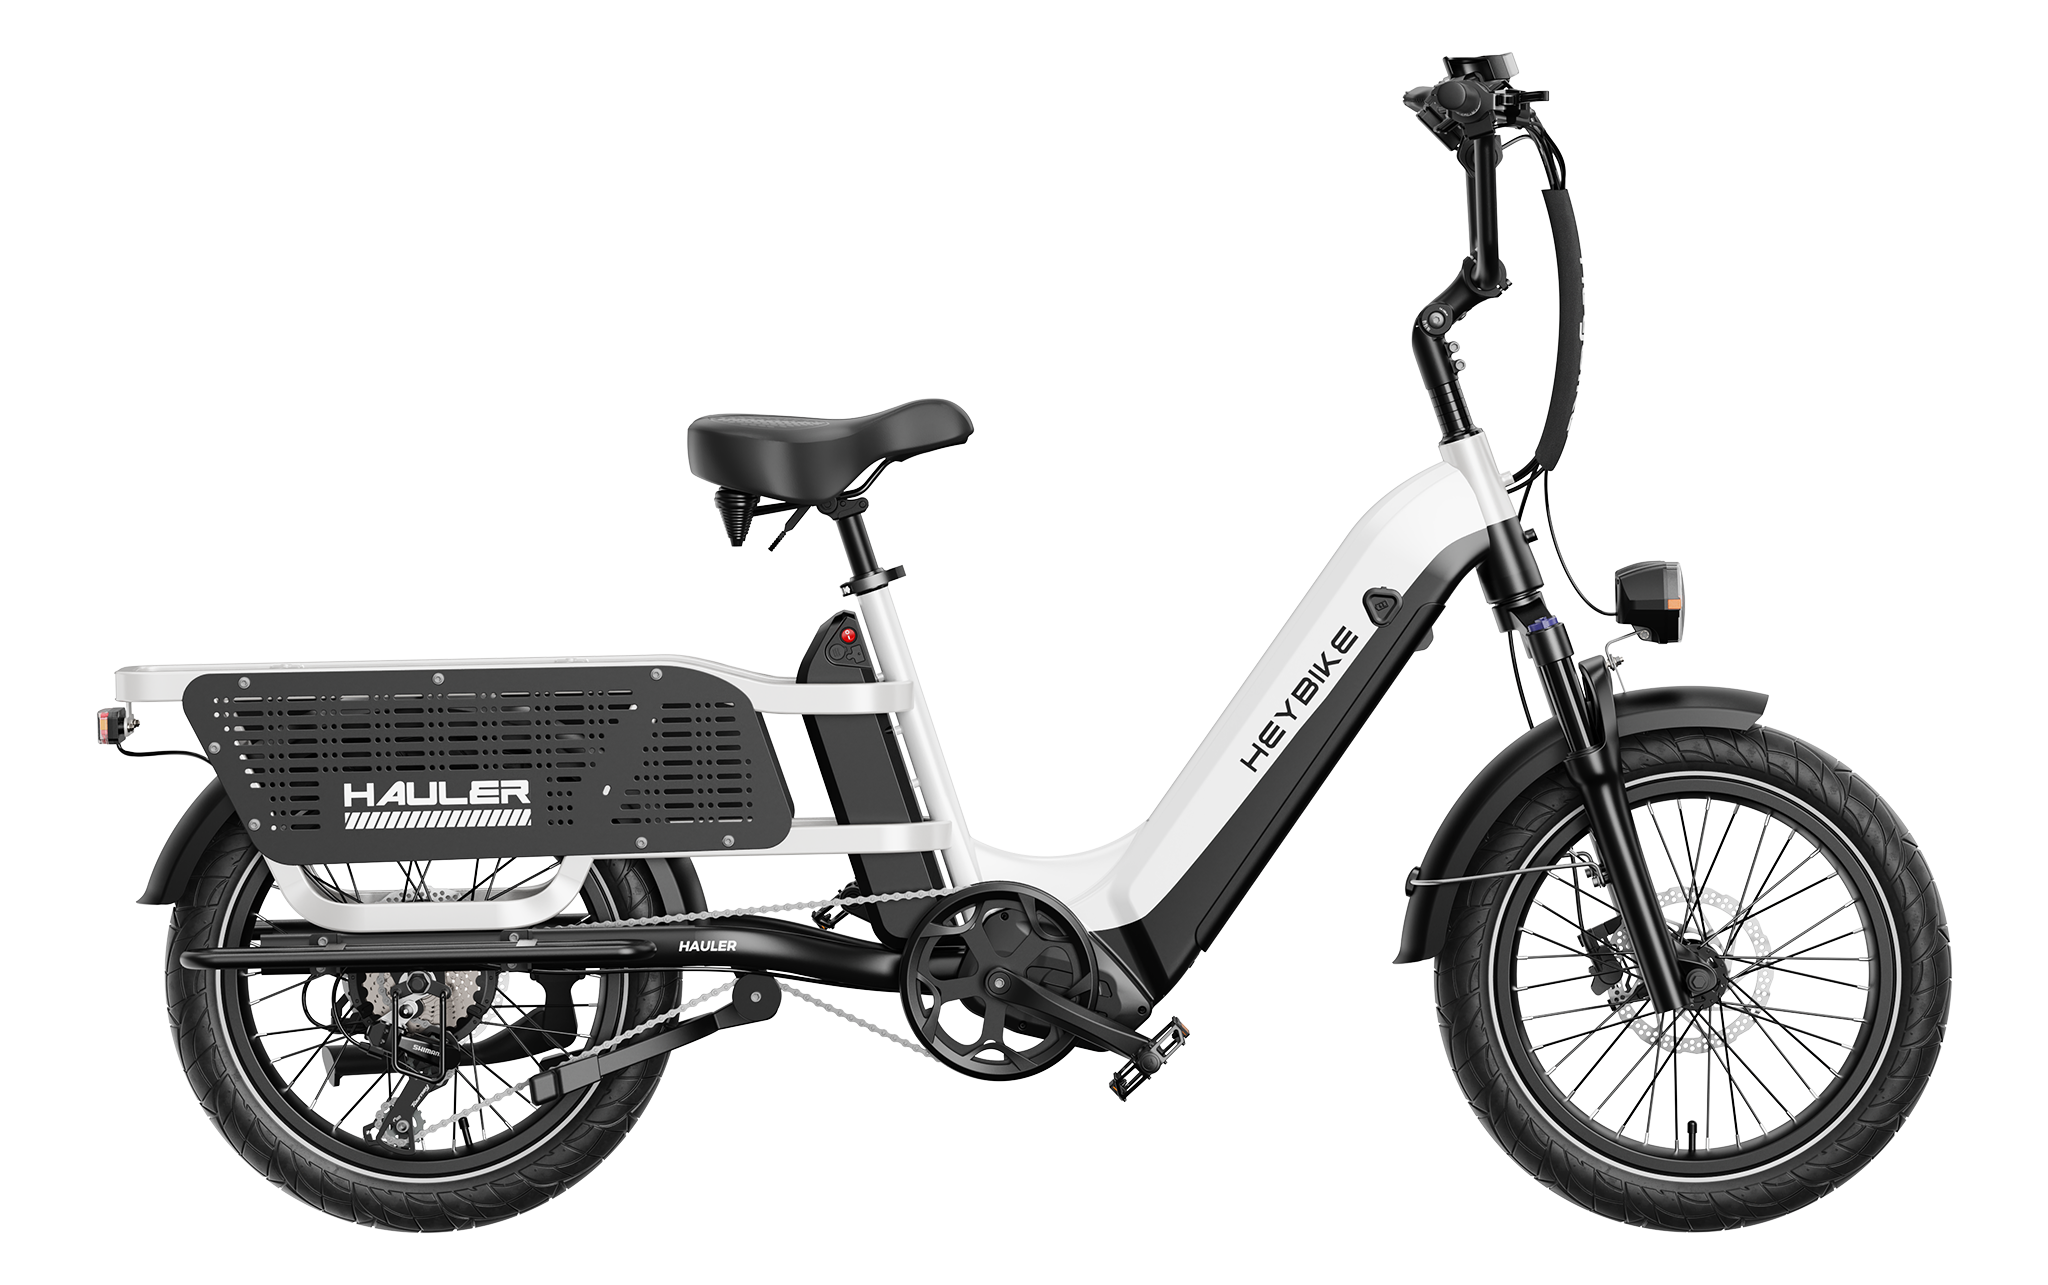 Hauler - Electric cargo ebike with dual battery, white